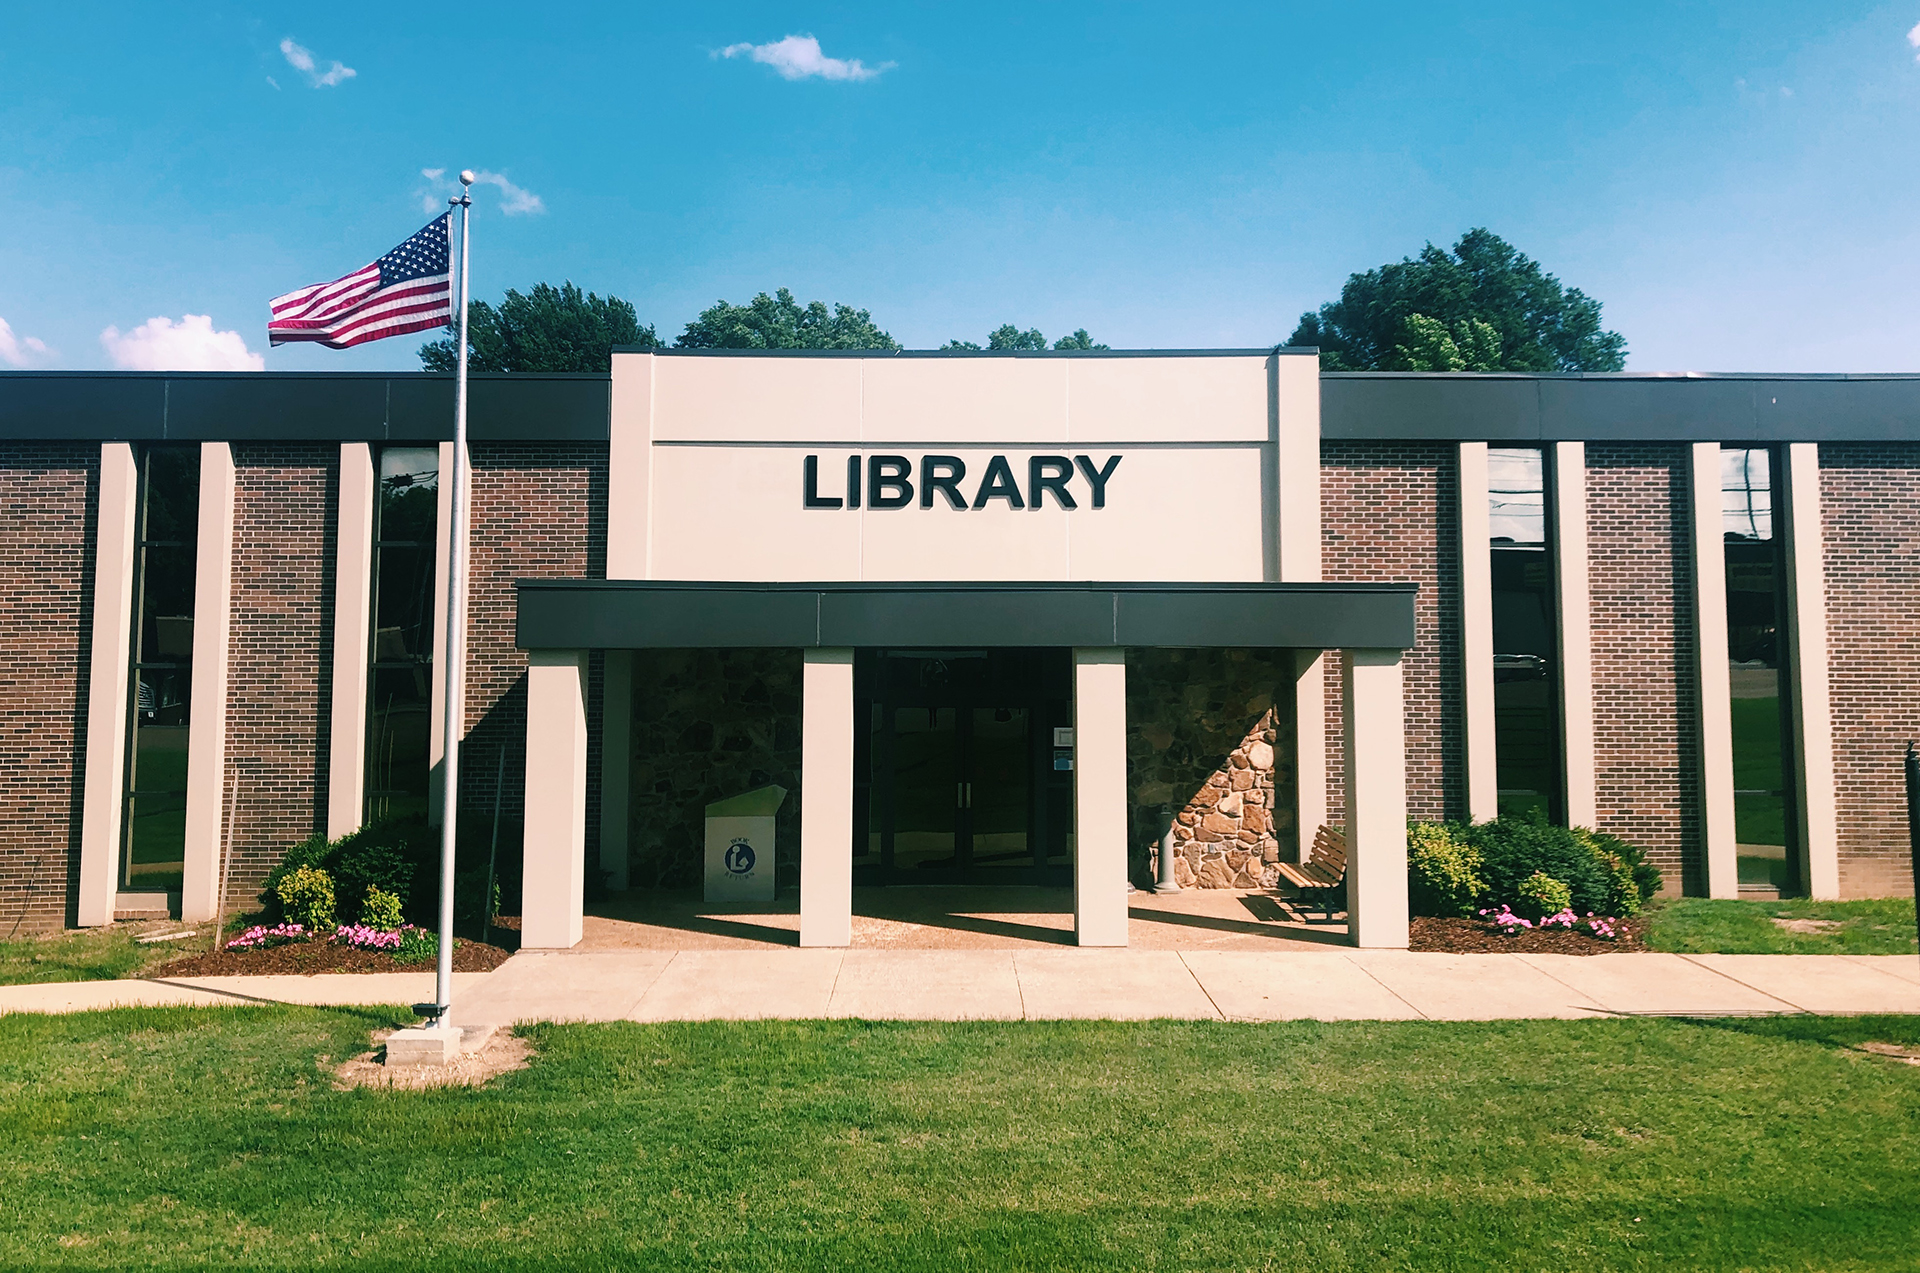 Mildred G. Fields Memorial Library